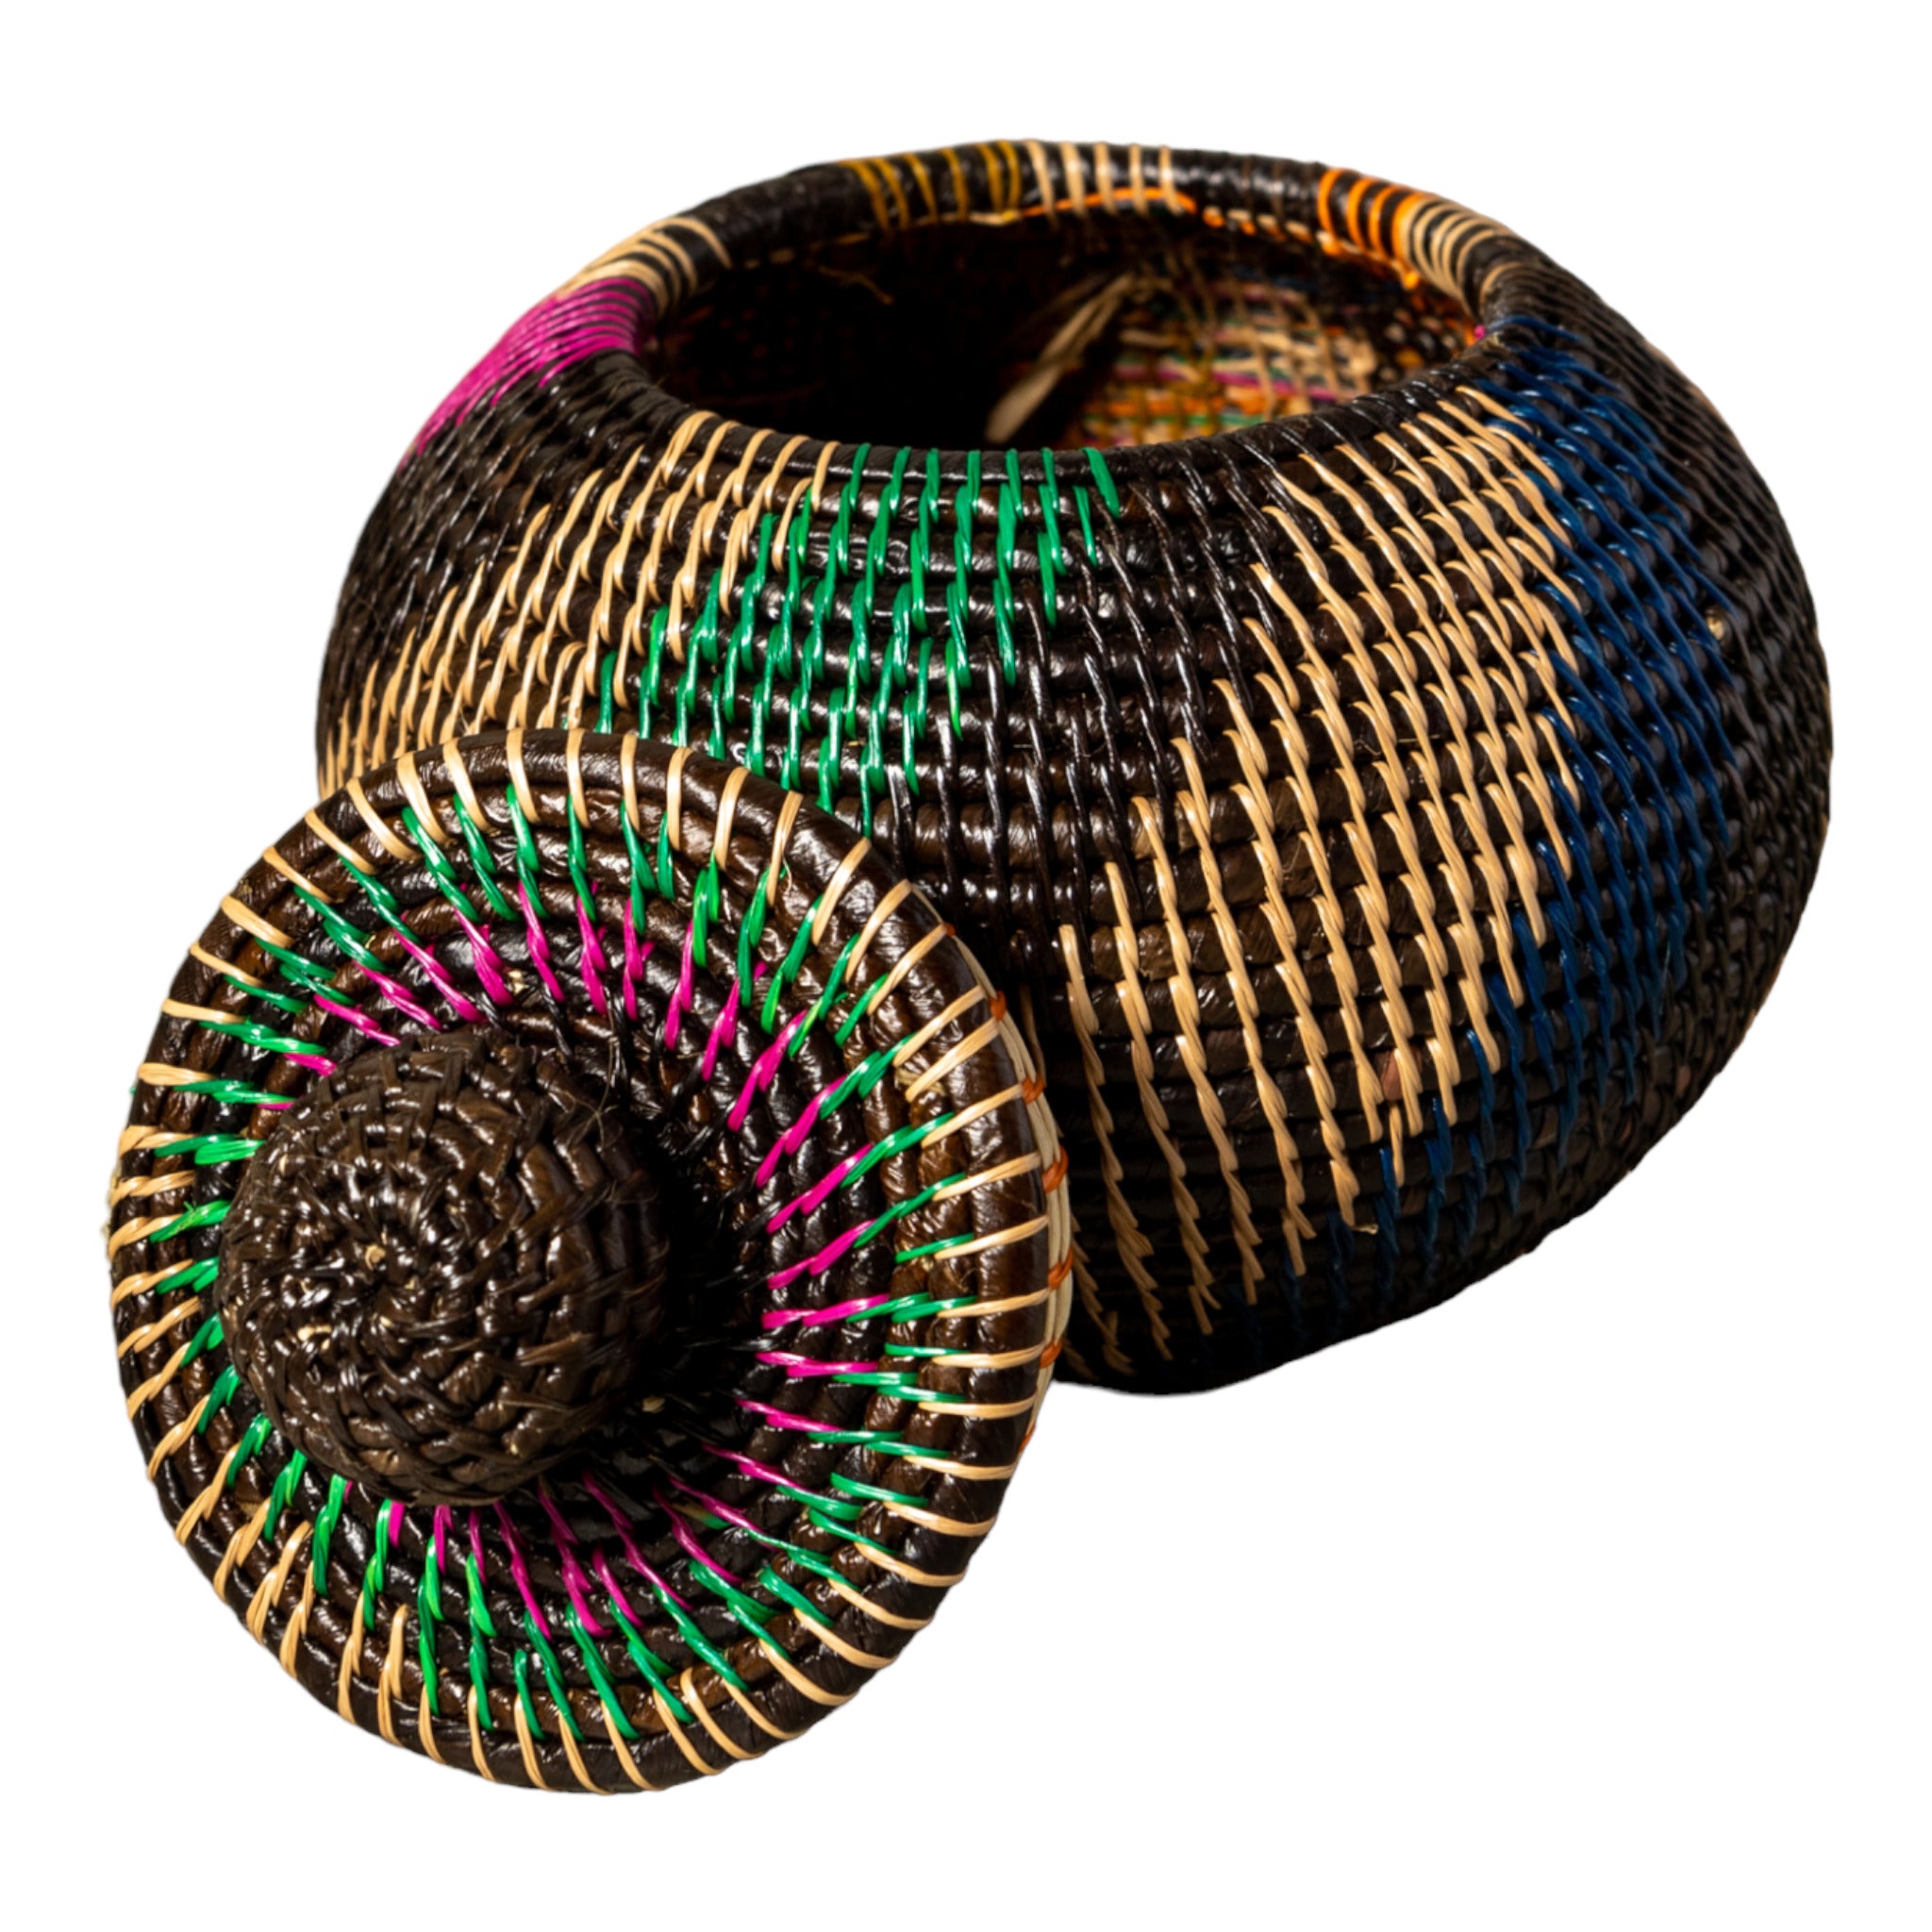 Jungle Mystic Woven Basket With Top